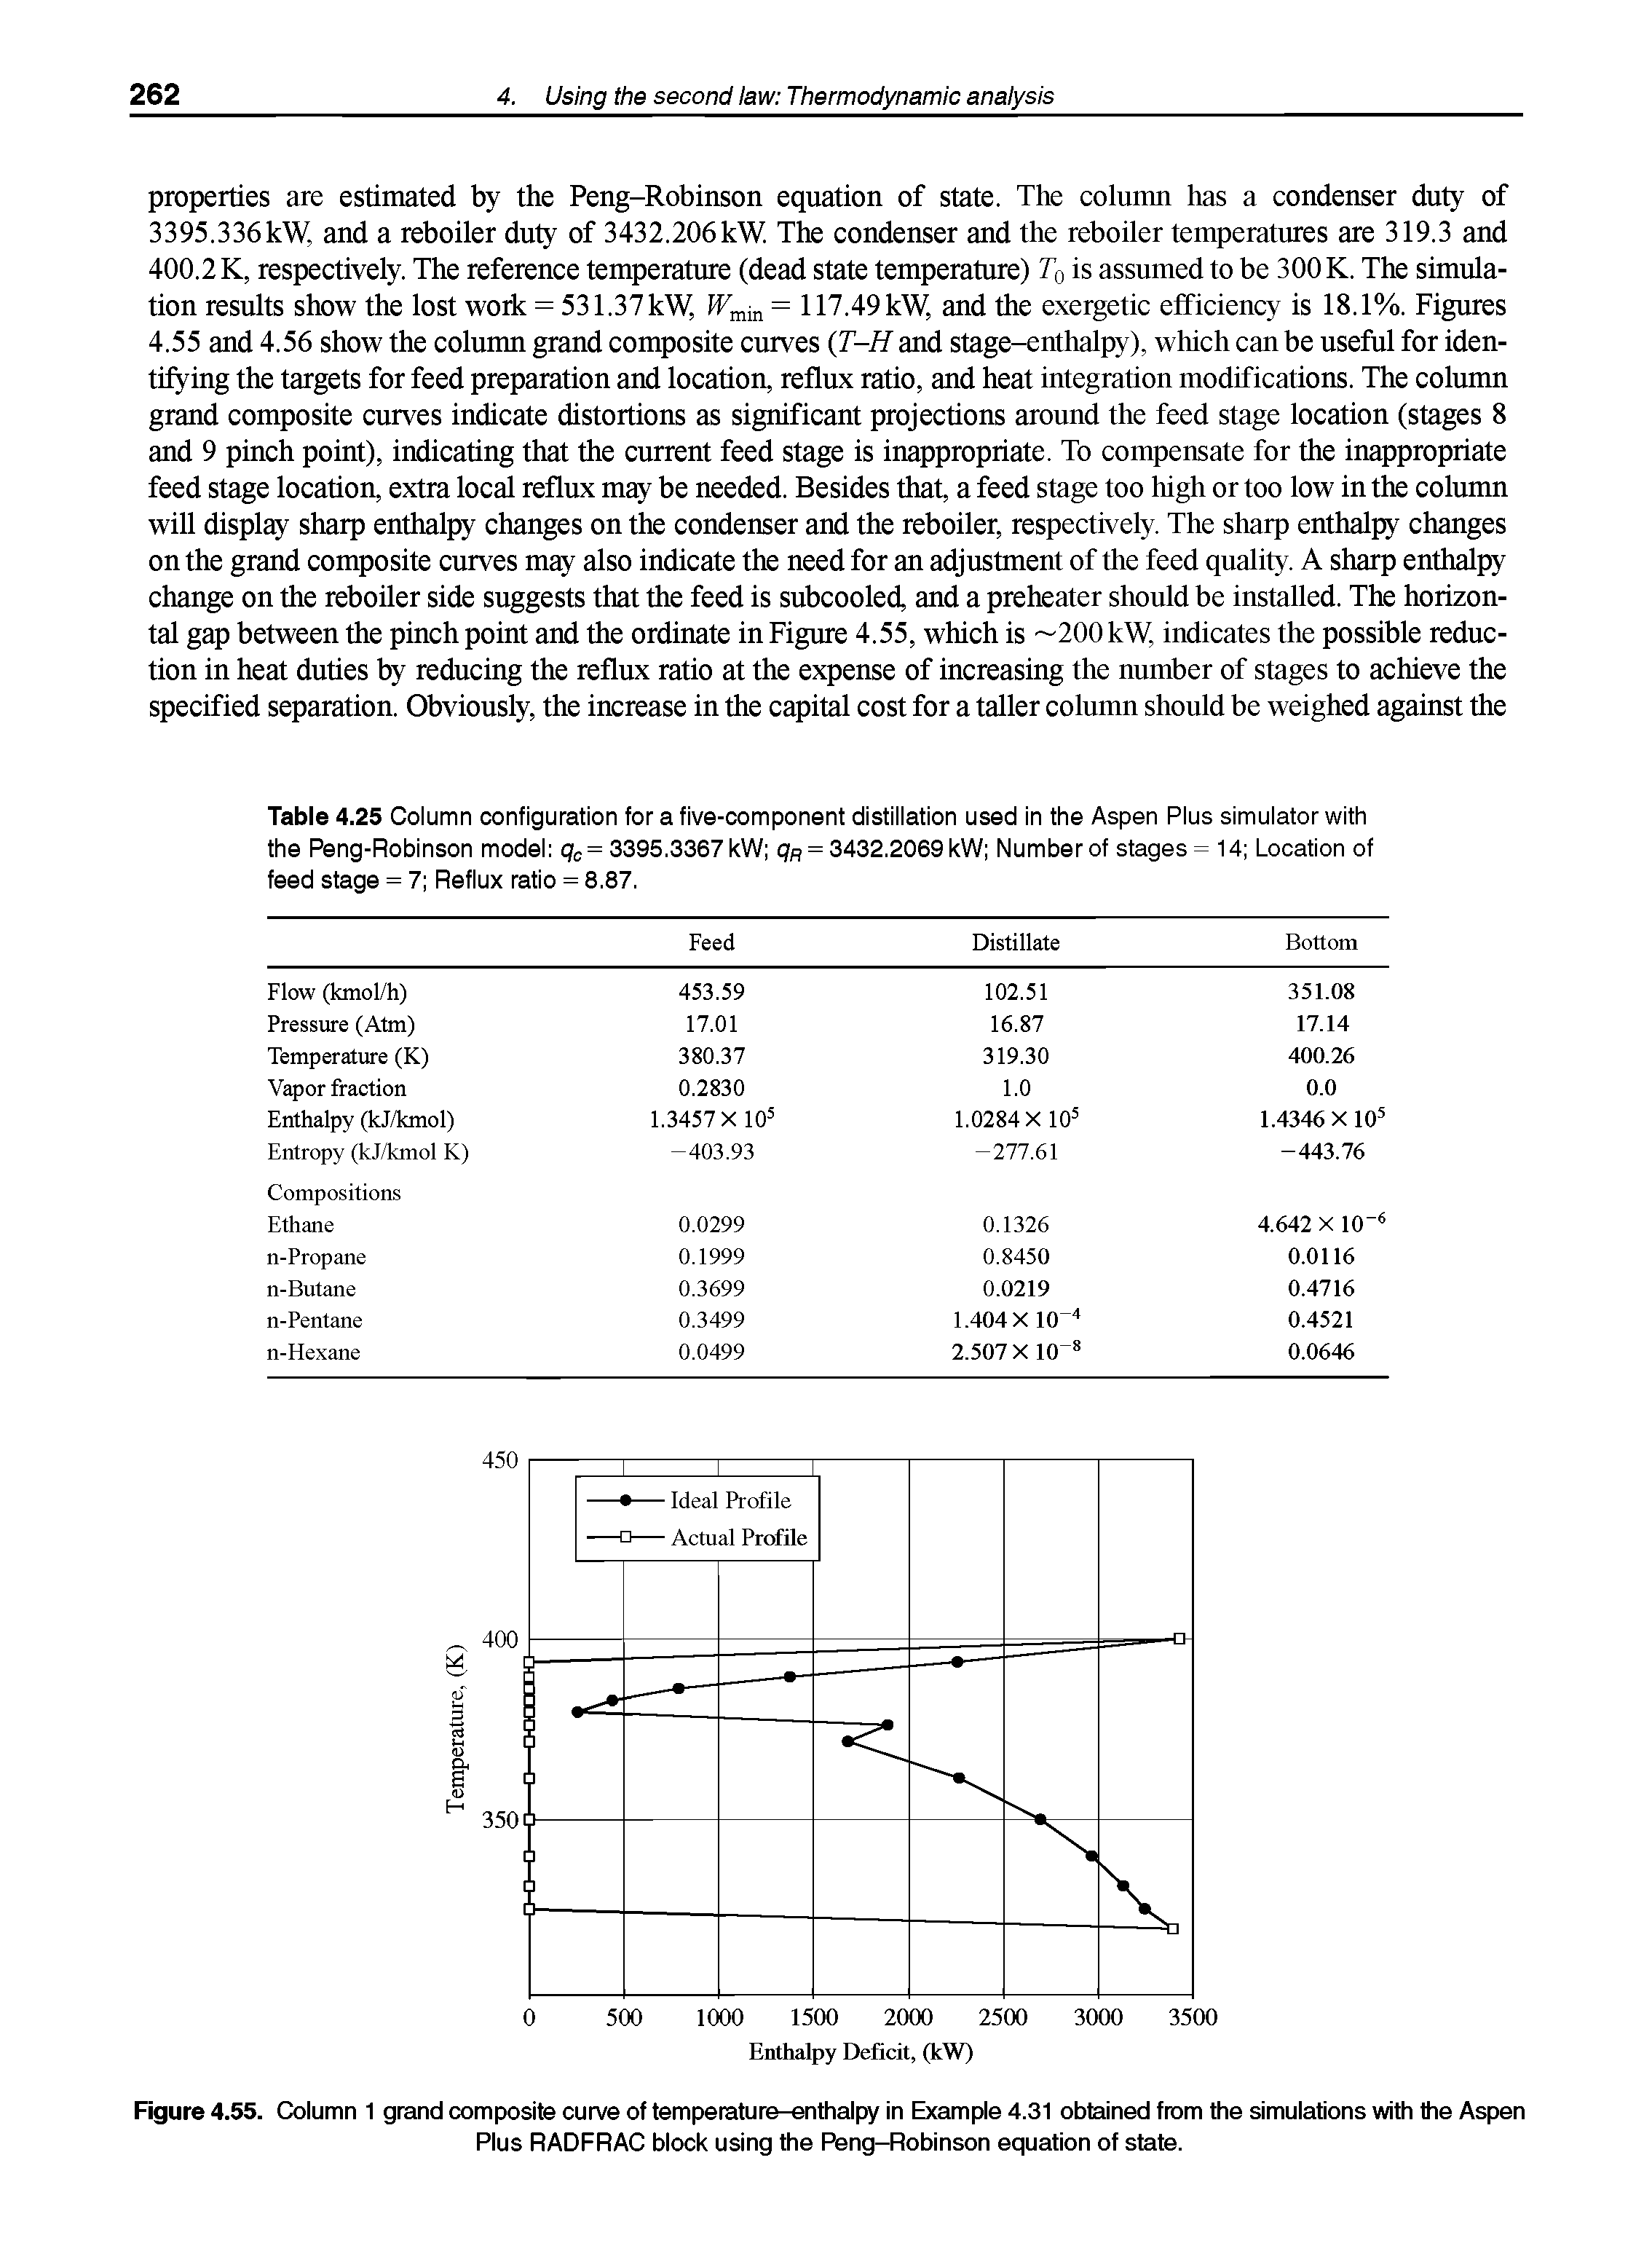 Table 4.25 Column configuration for a five-component distillation used in the Aspen Plus simulator with the Peng-Robinson model qc= 3395.3367 kW qR = 3432.2069 kW Number of stages = 14 Location of feed stage = 7 Reflux ratio = 8.87.